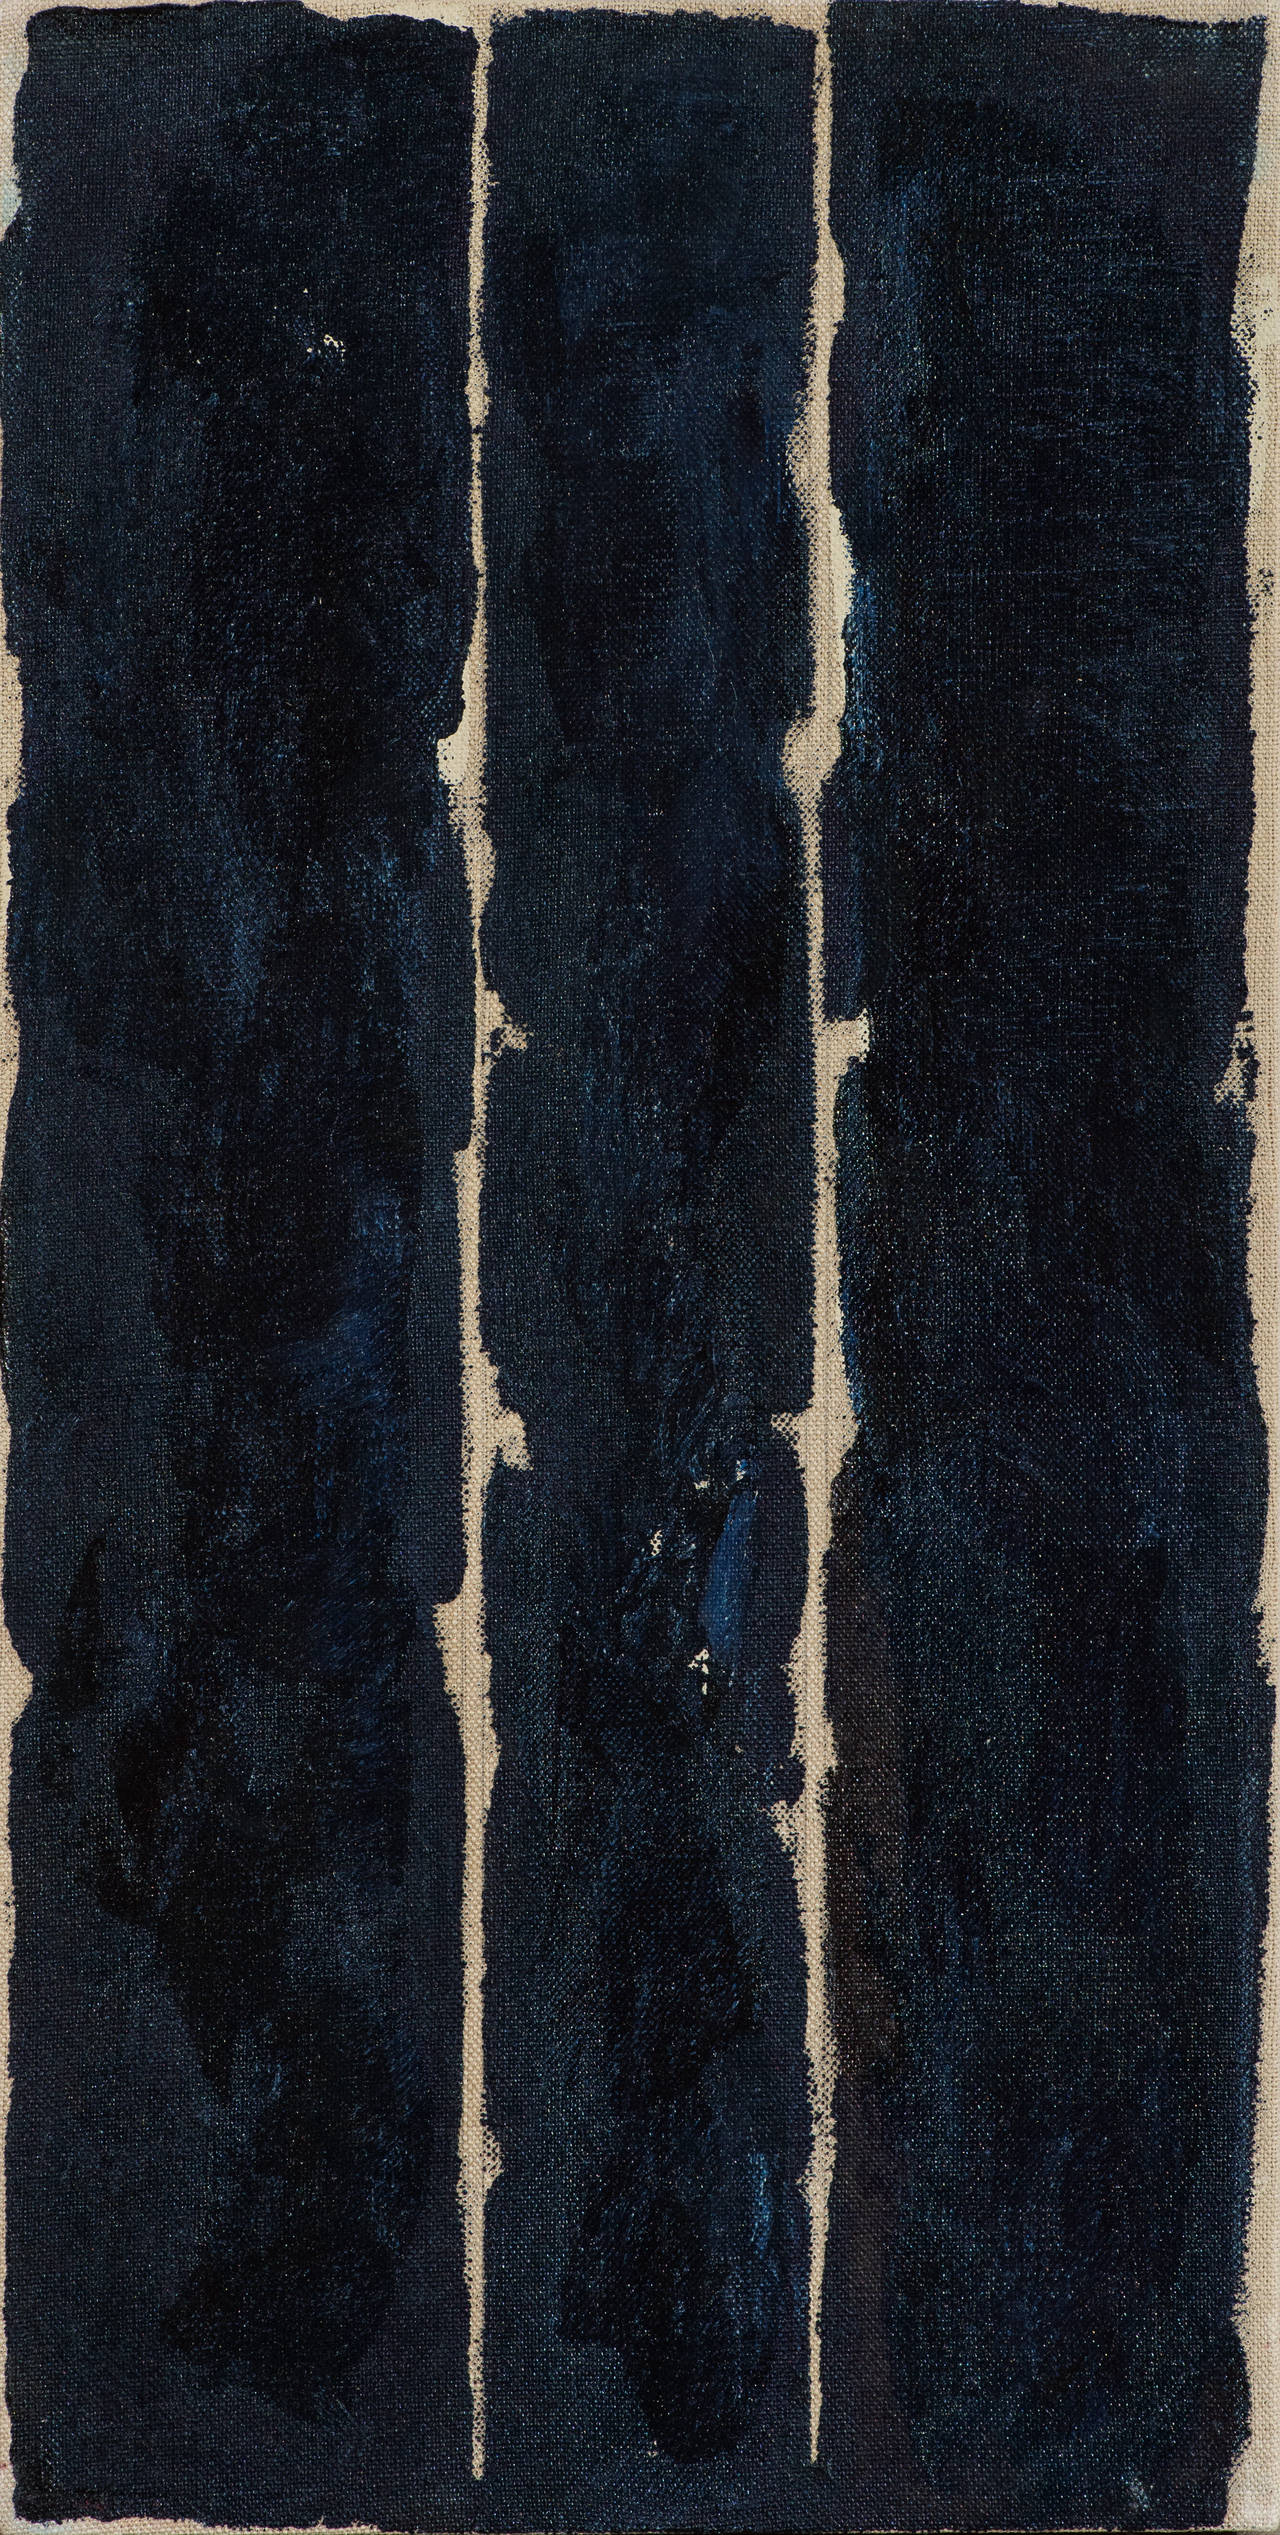 Mala Breuer Abstract Painting - Untitled Black (1979)